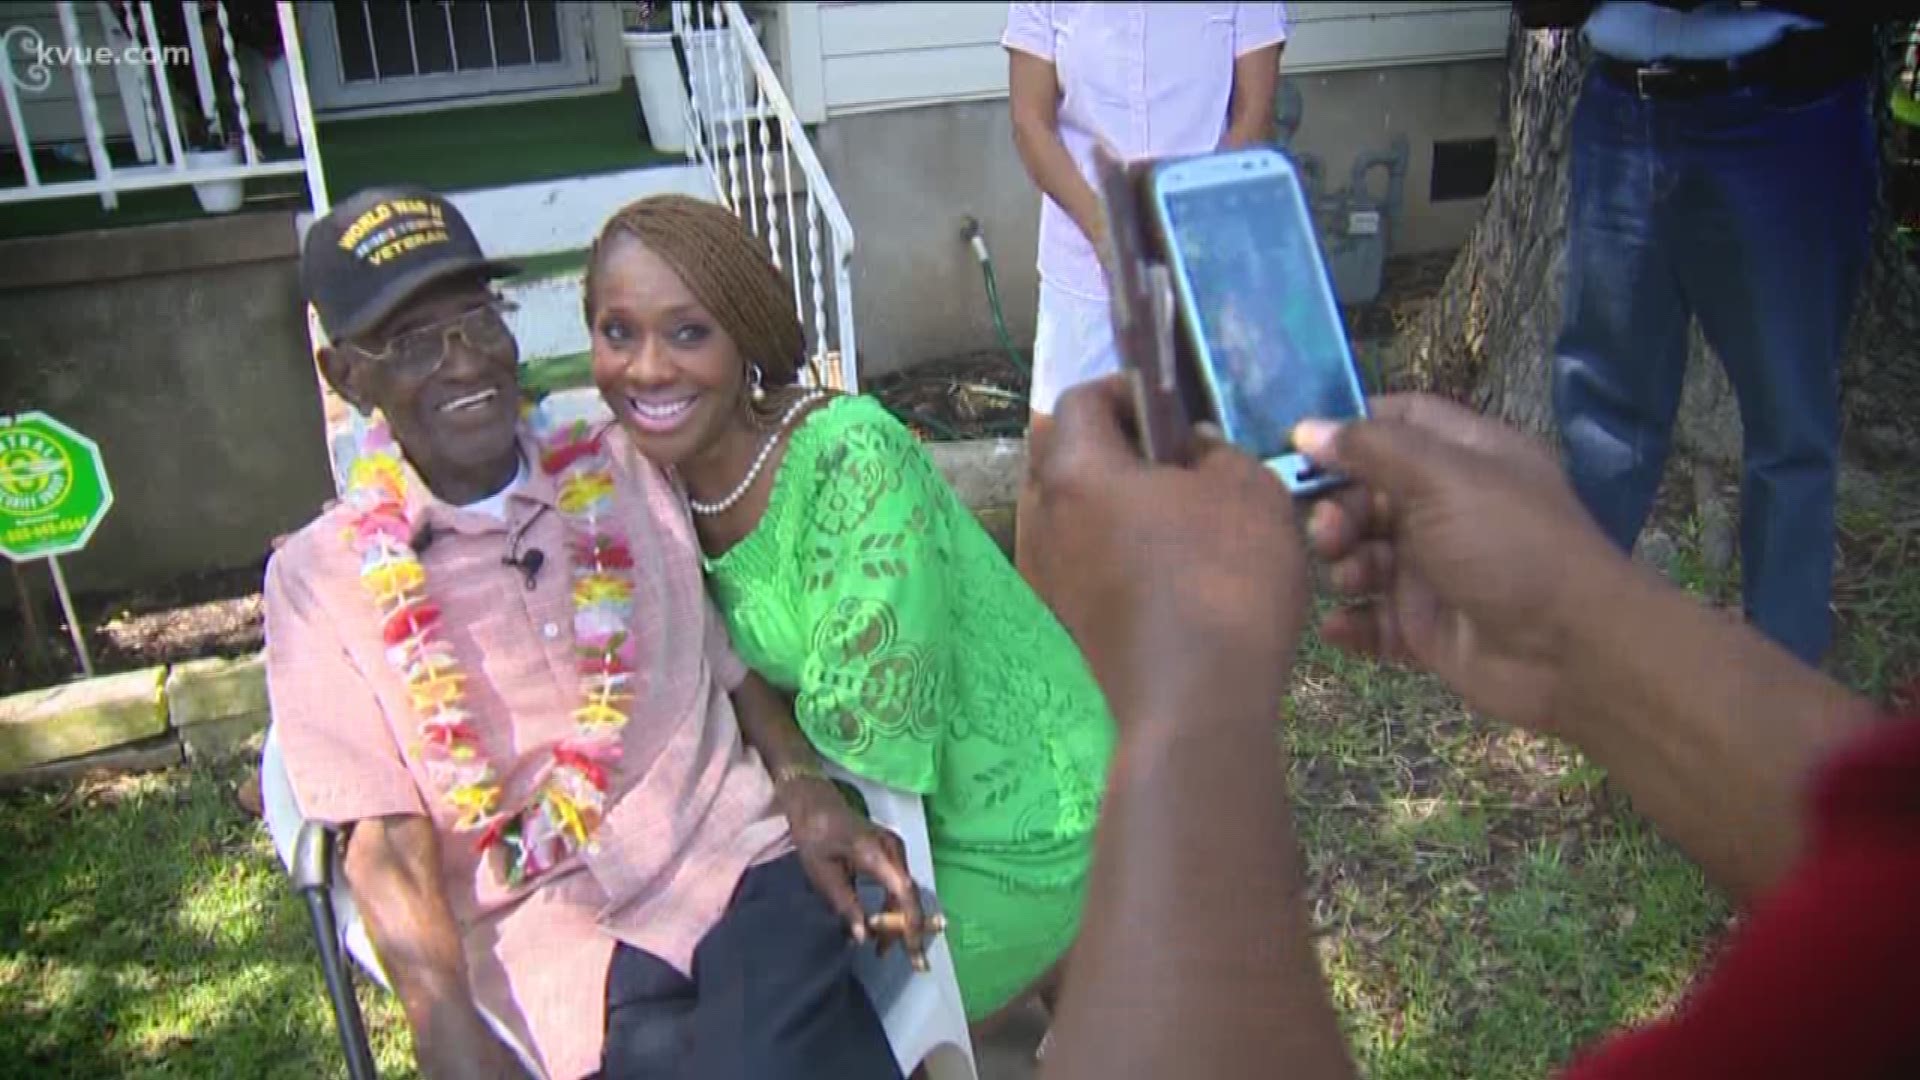 Richard Overton's family has a rich history throughout the city of Austin